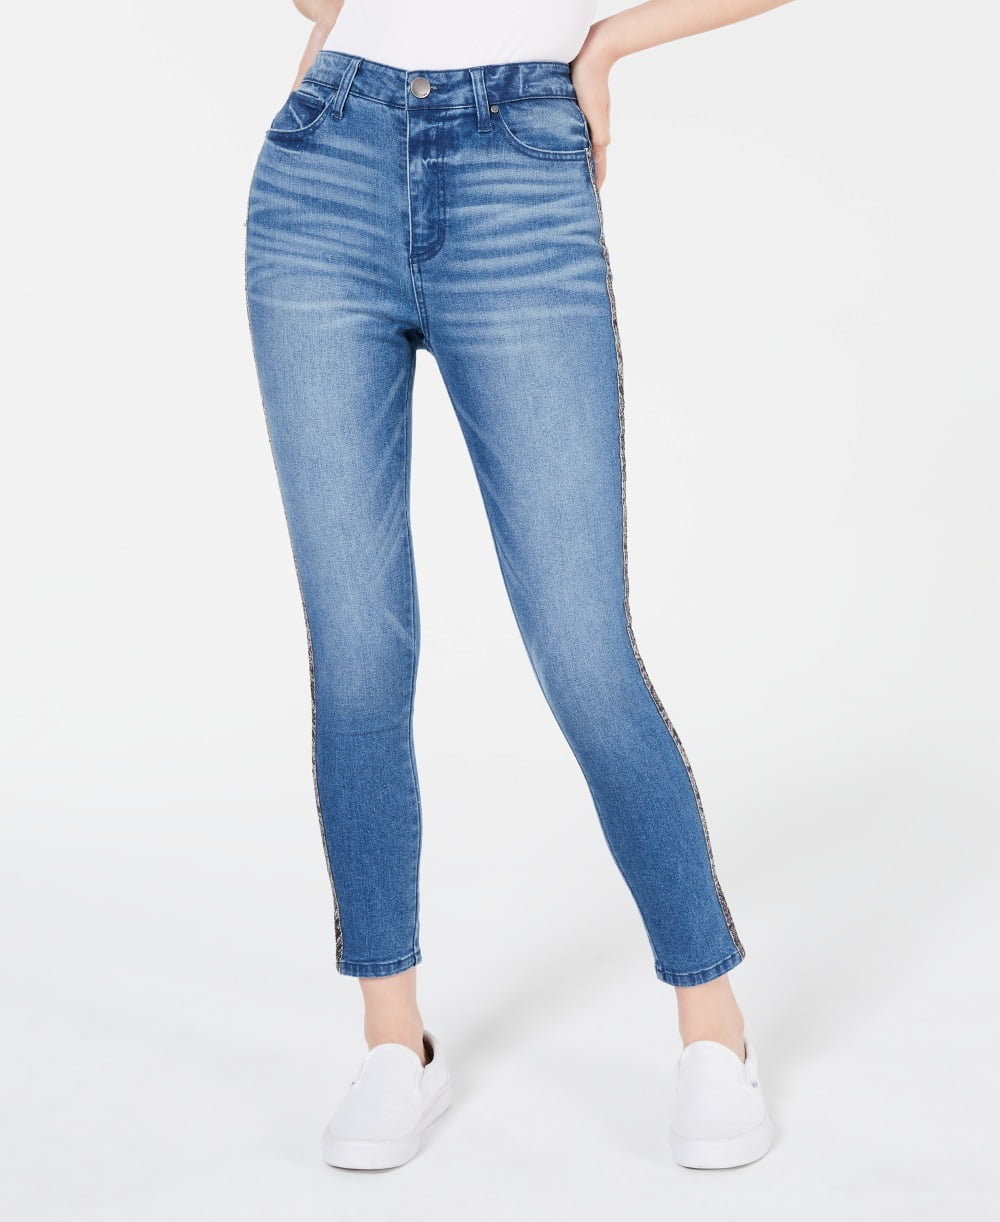 Tinseltown Juniors Paneled Ankle Skinny Jeans 